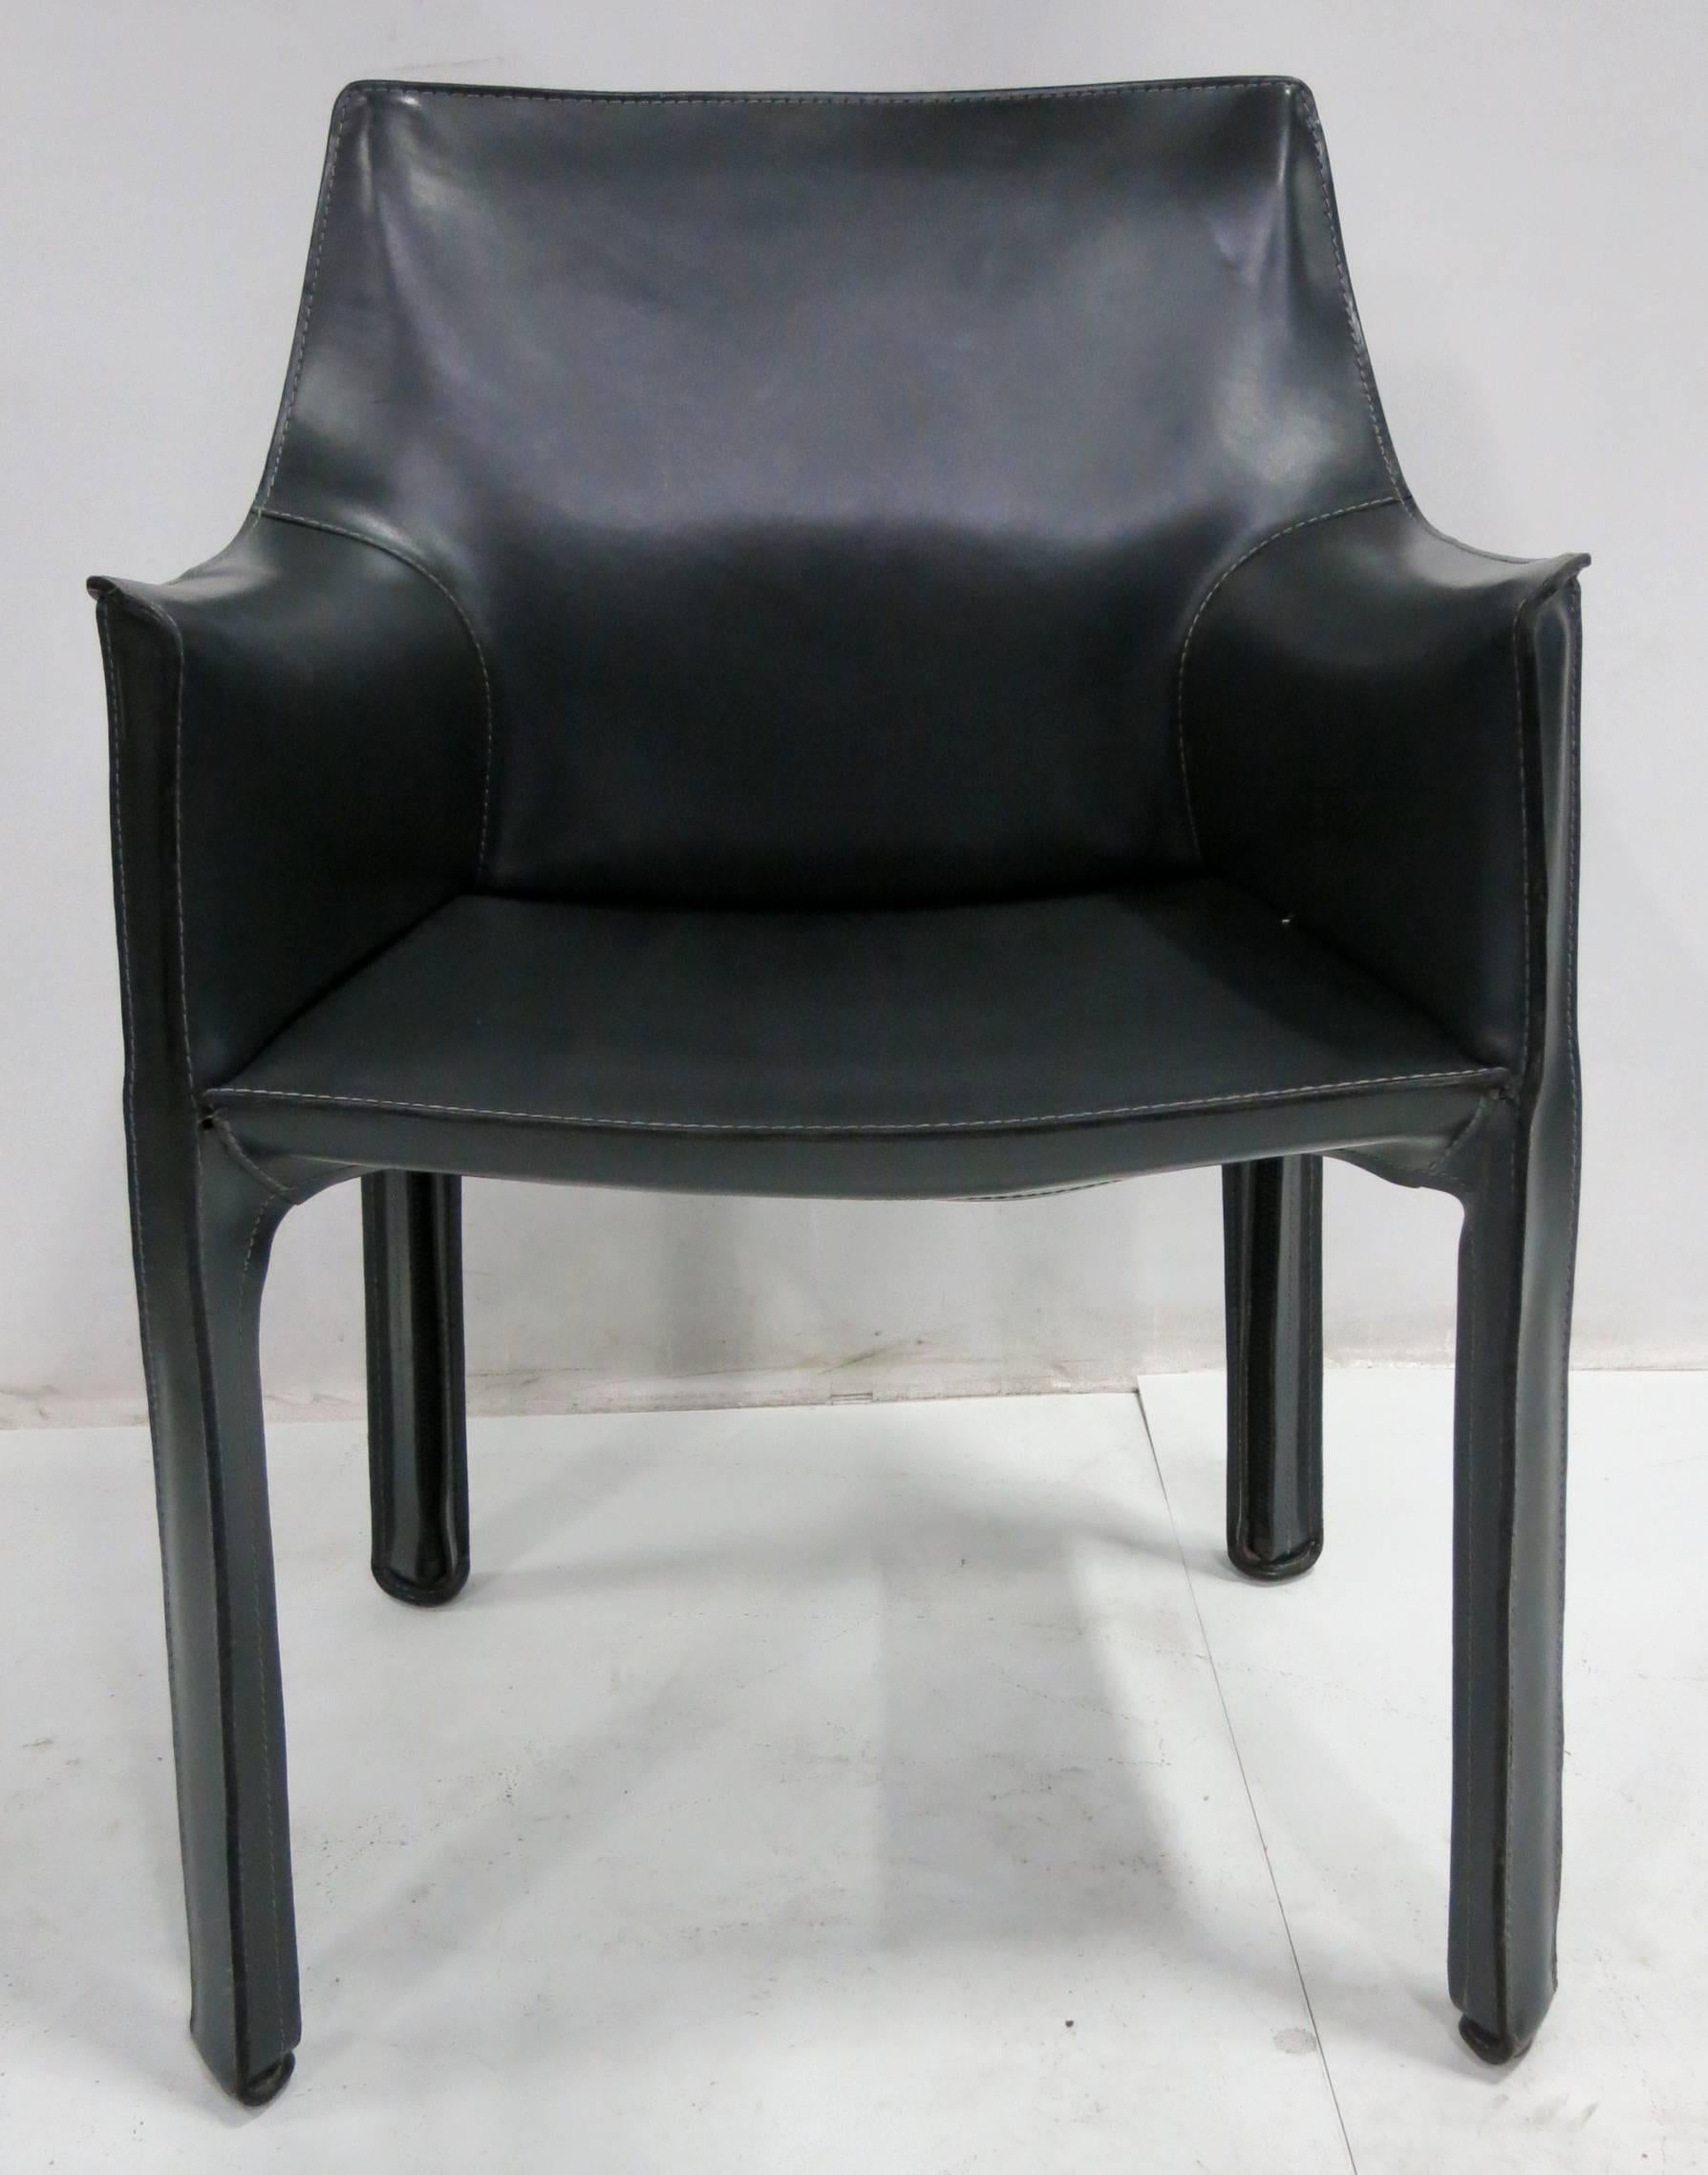 Set of four grey cab armchairs by Mario Bellini for Cassina. The set is in excellent condition.